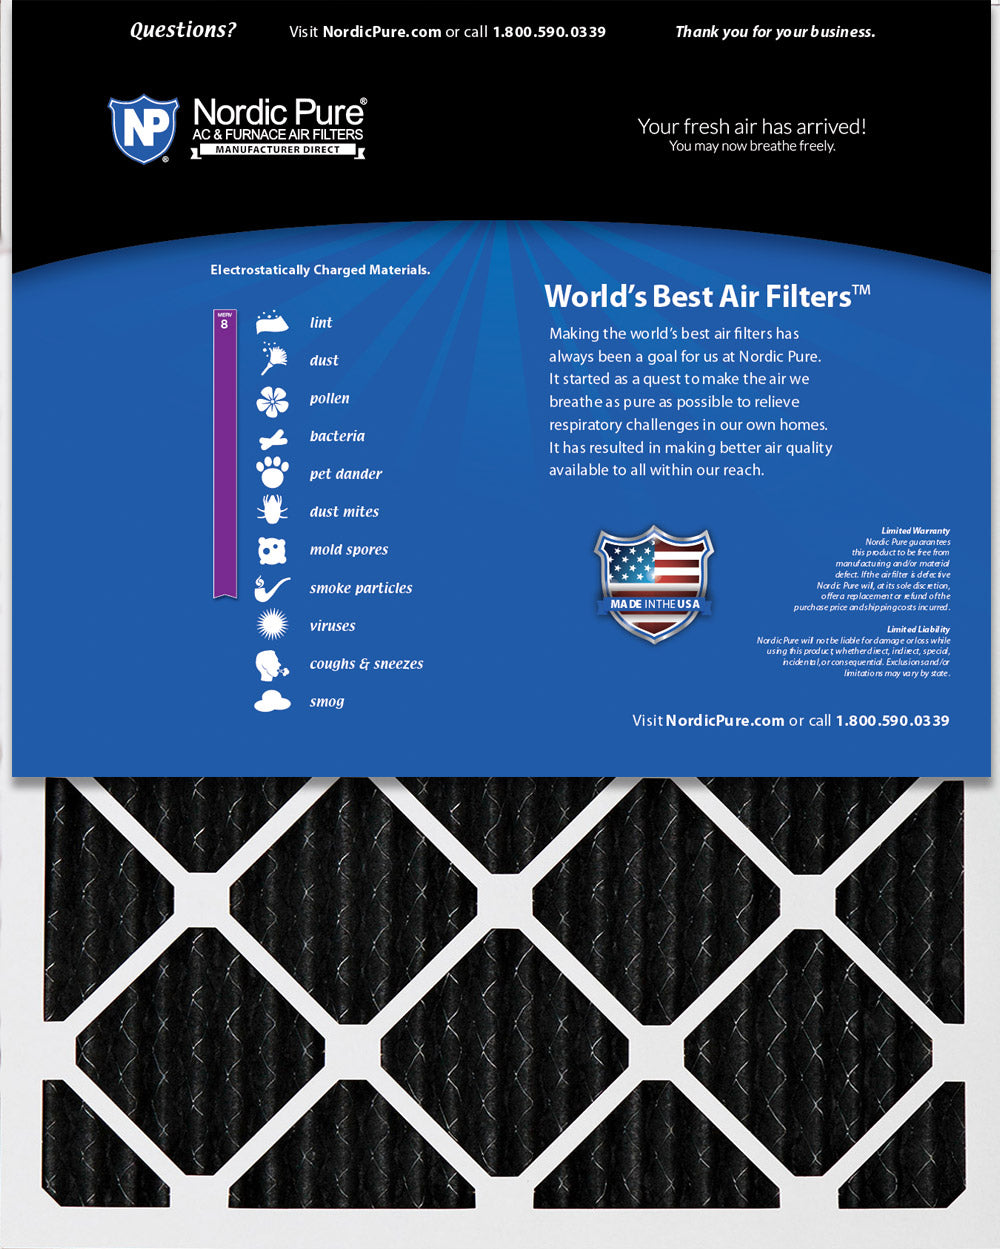 14x24x1 Pure Carbon Pleated Odor Reduction Furnace Air Filters